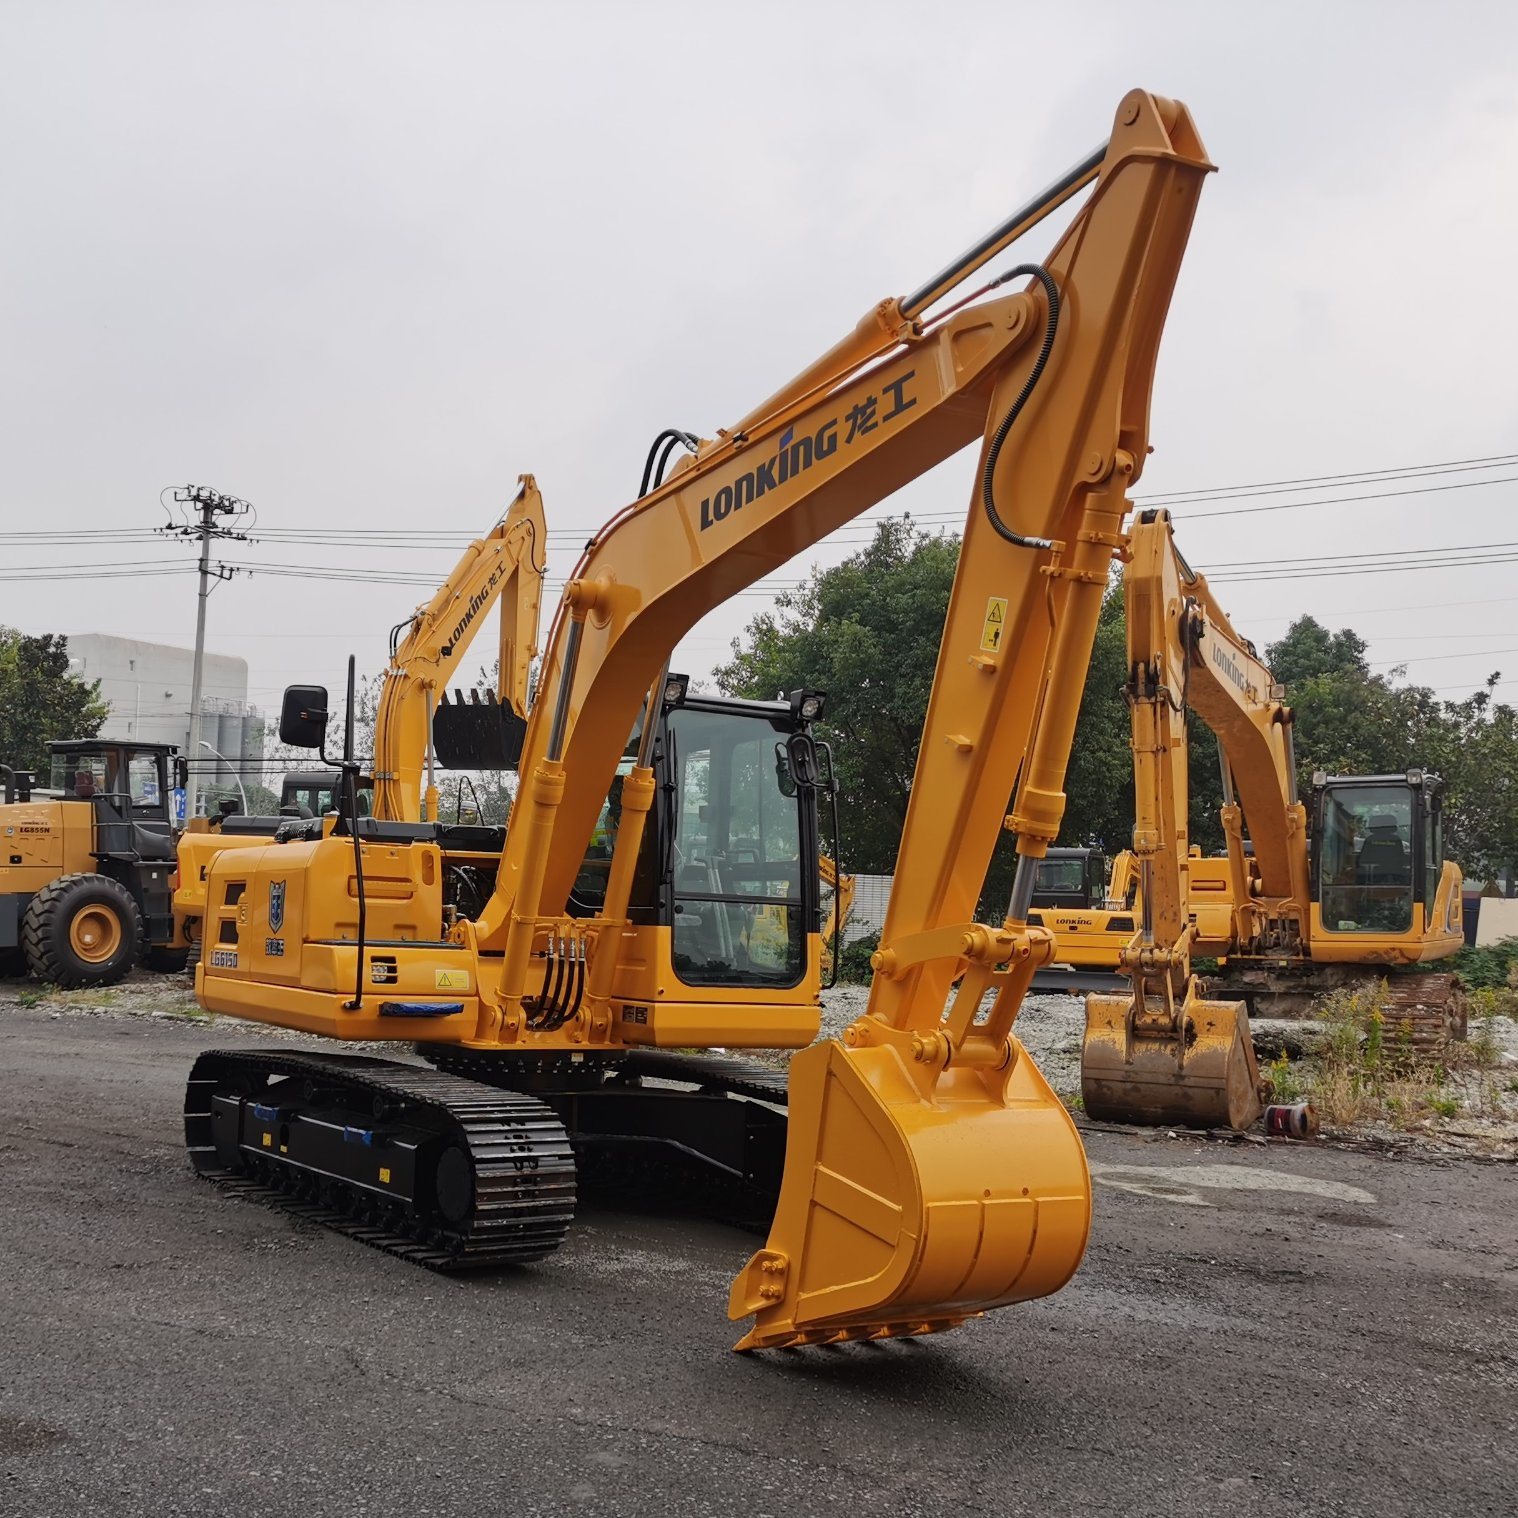 Chinese Manufacturer Oriemac 15 Ton Crawler Excavator LG6150 with Hydraulic Breaker for Sale